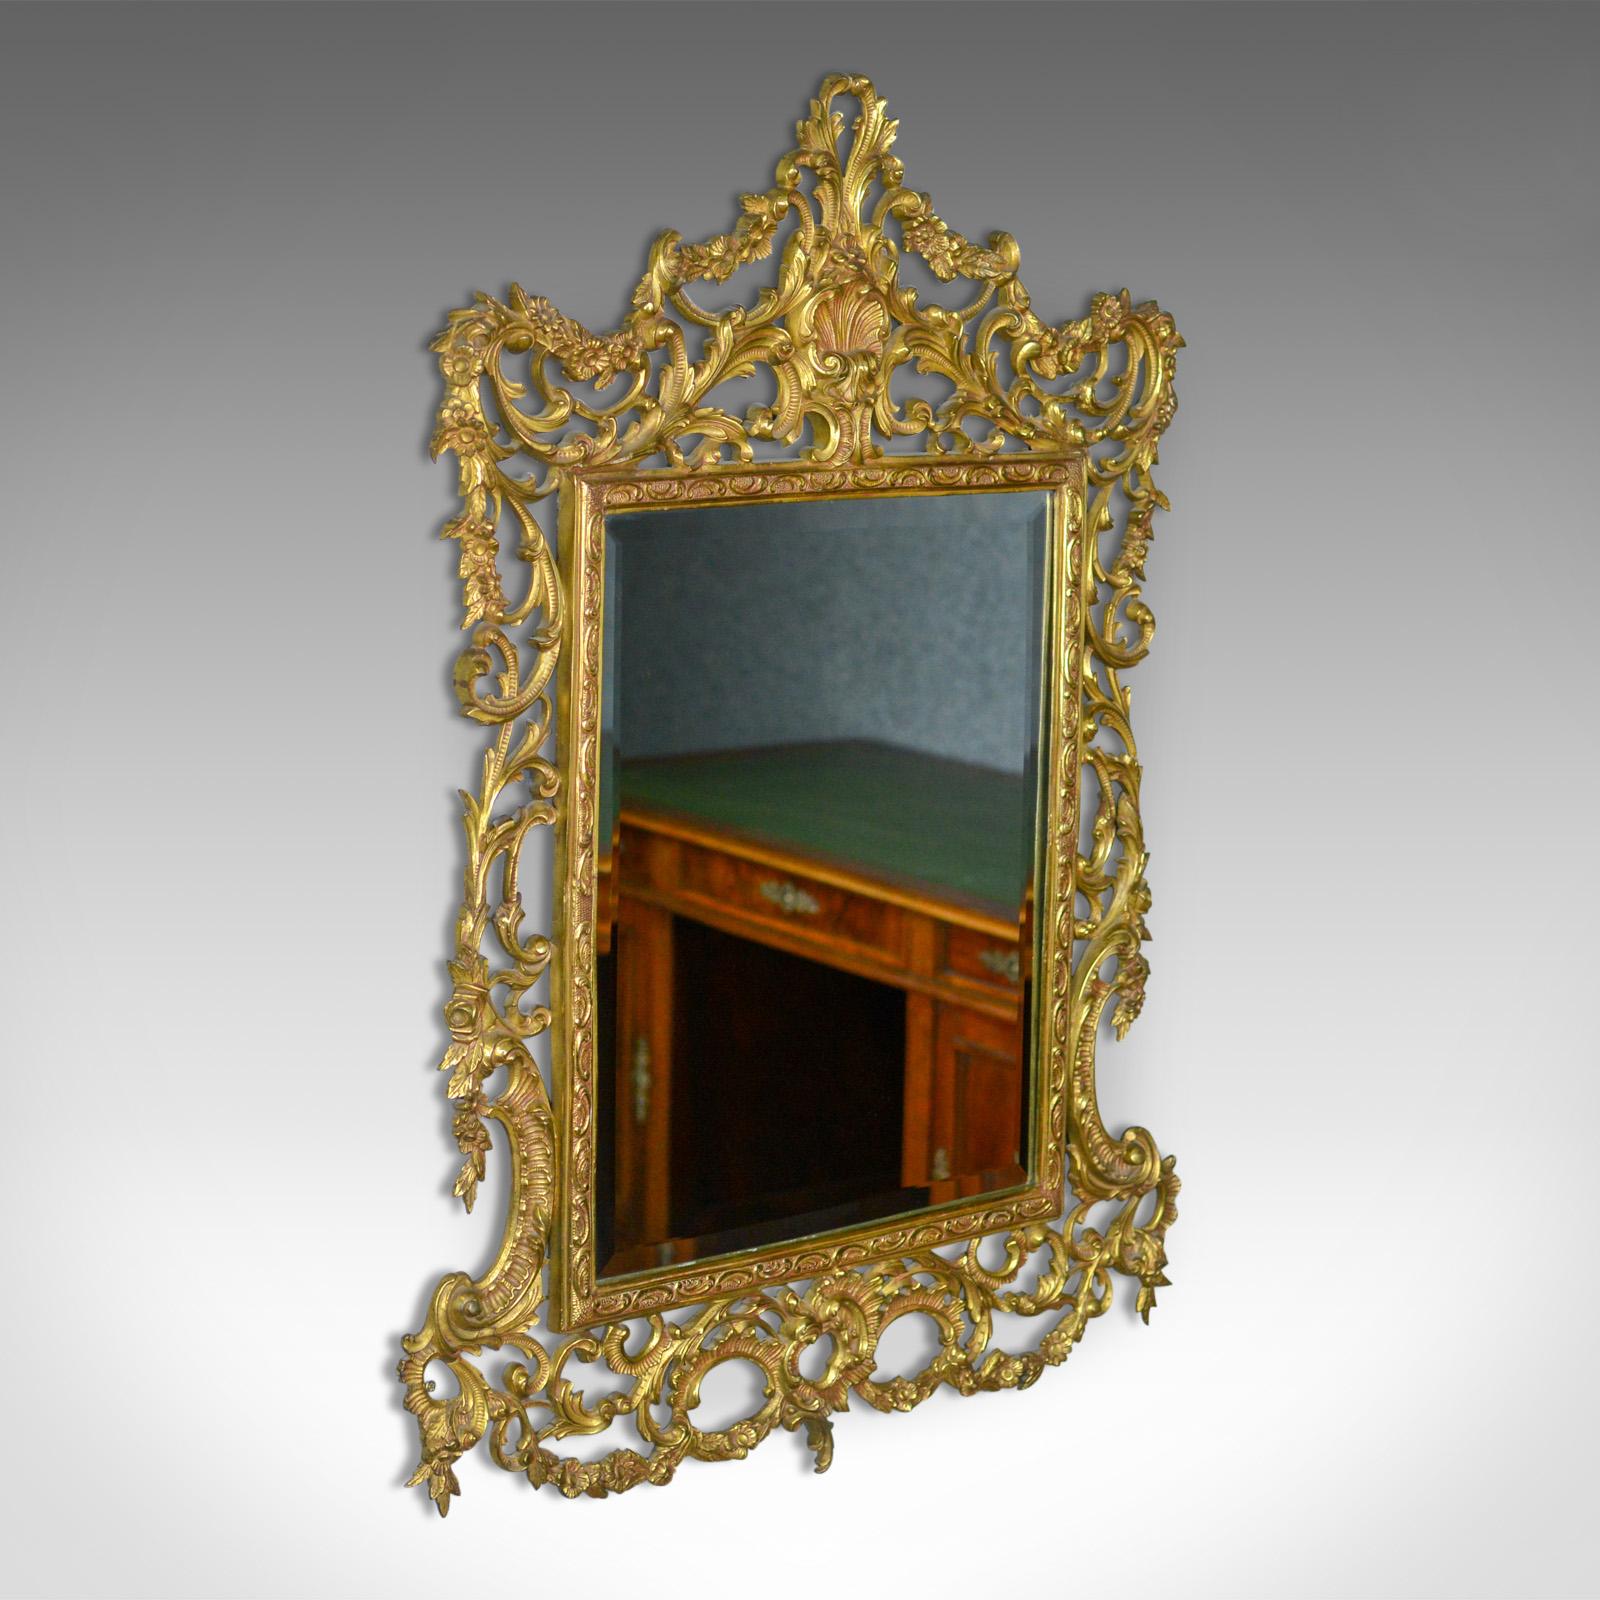 This is a vintage wall mirror, an English piece in the Rococo revival manner dating to the Art Deco period of the 20th century, circa 1940.

An elaborate and elegant Italianate design
Gilt metal frame featuring scrolls, floral and foliate